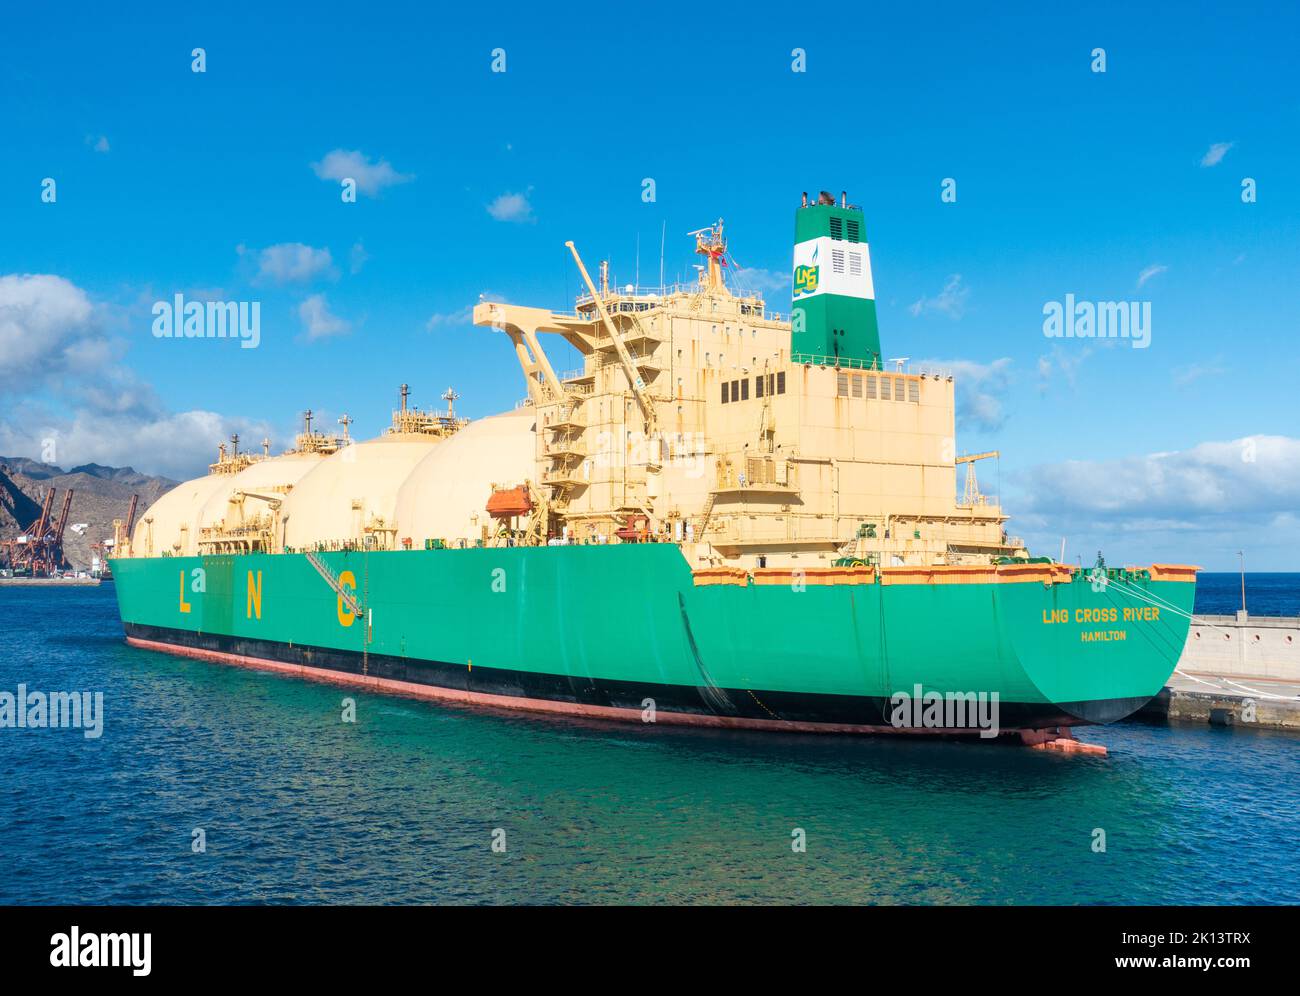 Ship carrying Liquefied natural gas. Stock Photo